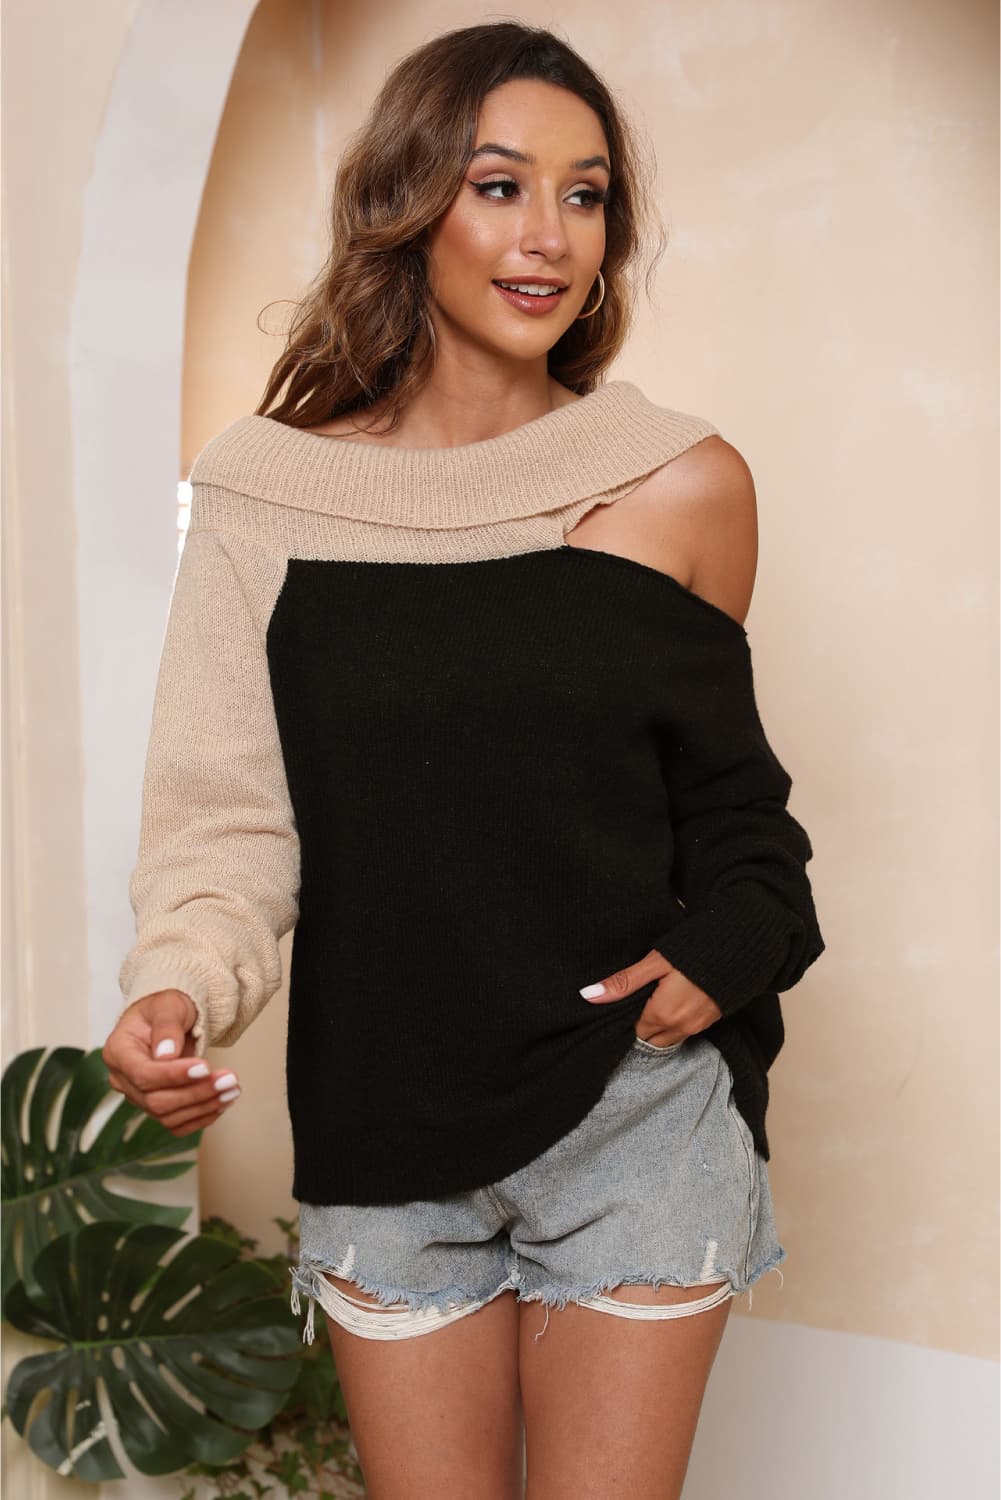 Asymmetrical Long Sleeve Two-Tone Cutout Sweater - Guy Christopher